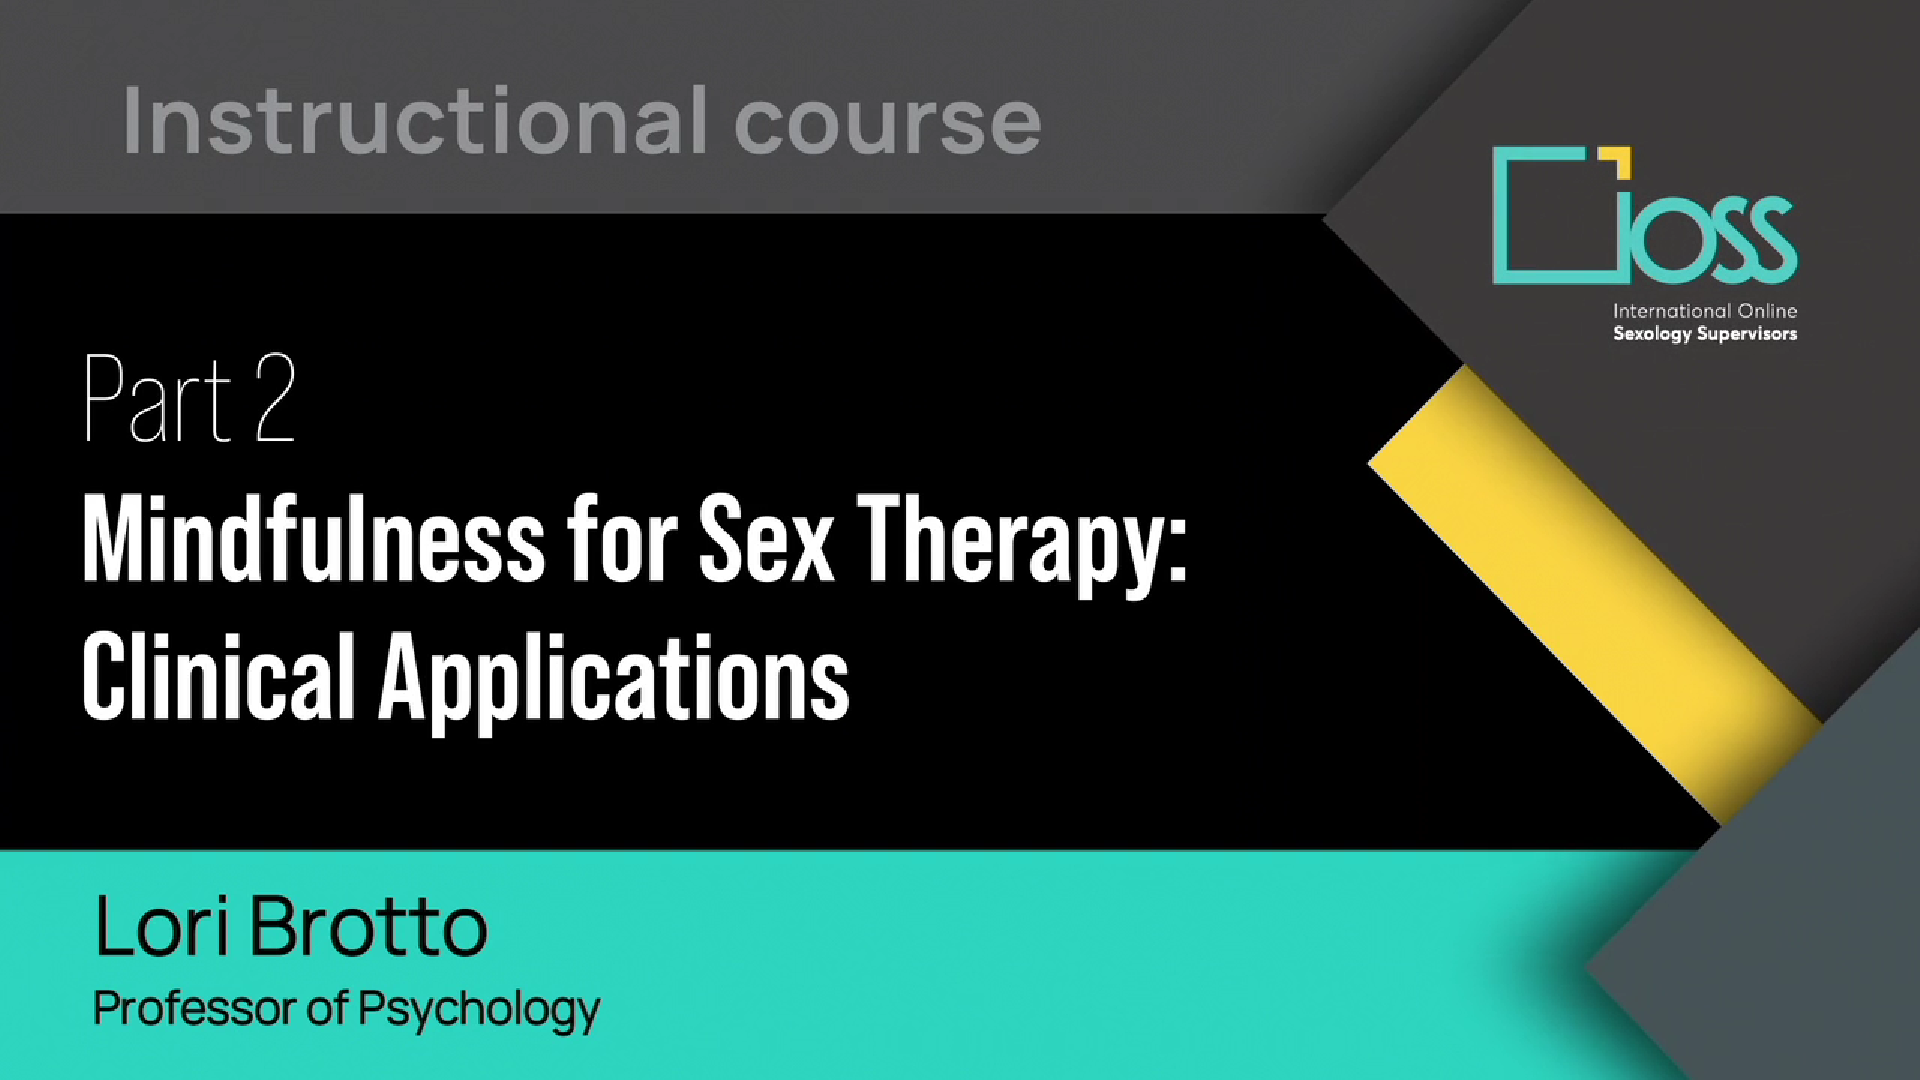 Part 2 Mindfulness for Sex Therapy: Clinical Applications (Part 1 & 2)